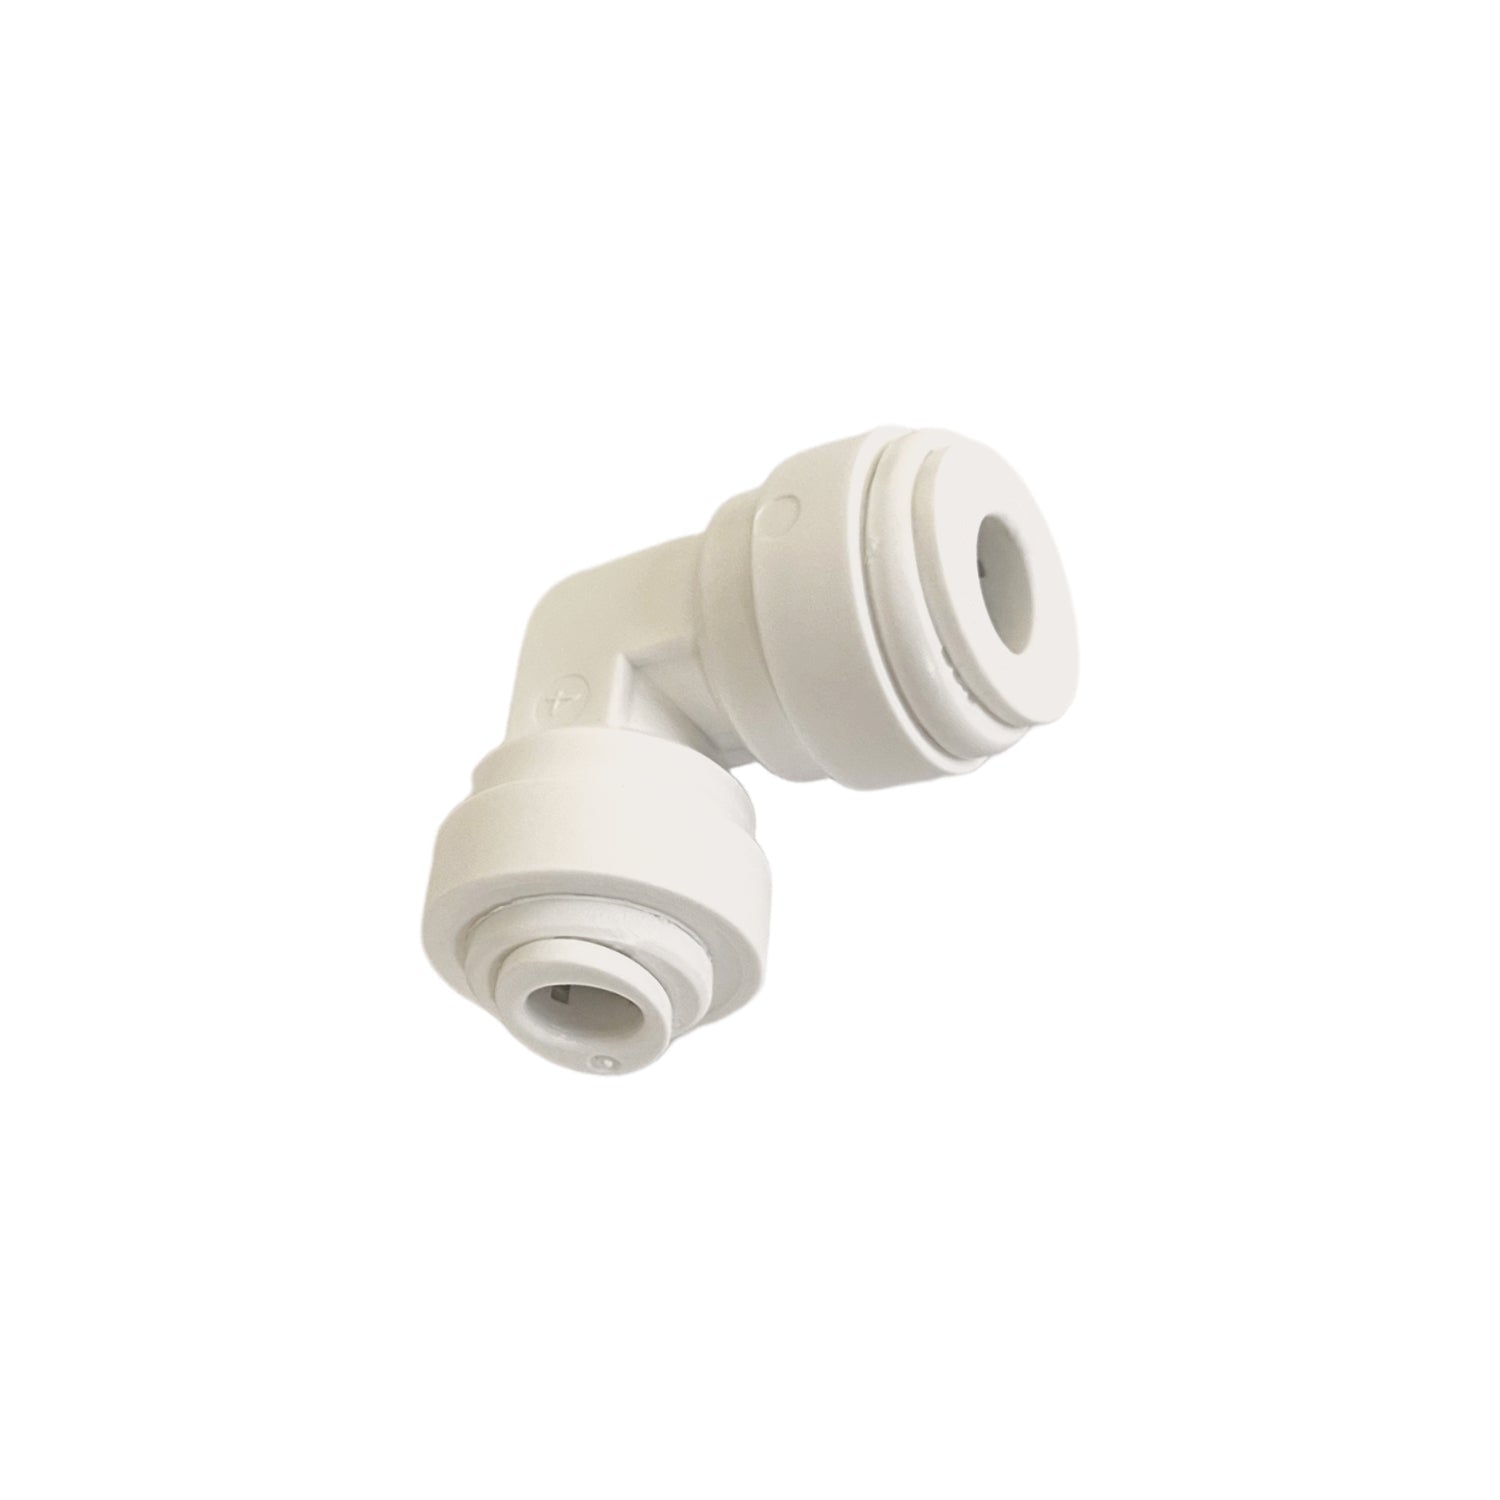 Quick Connect Fitting Elbow 1/4 inch Female to 1/4 inch Female - RKIN